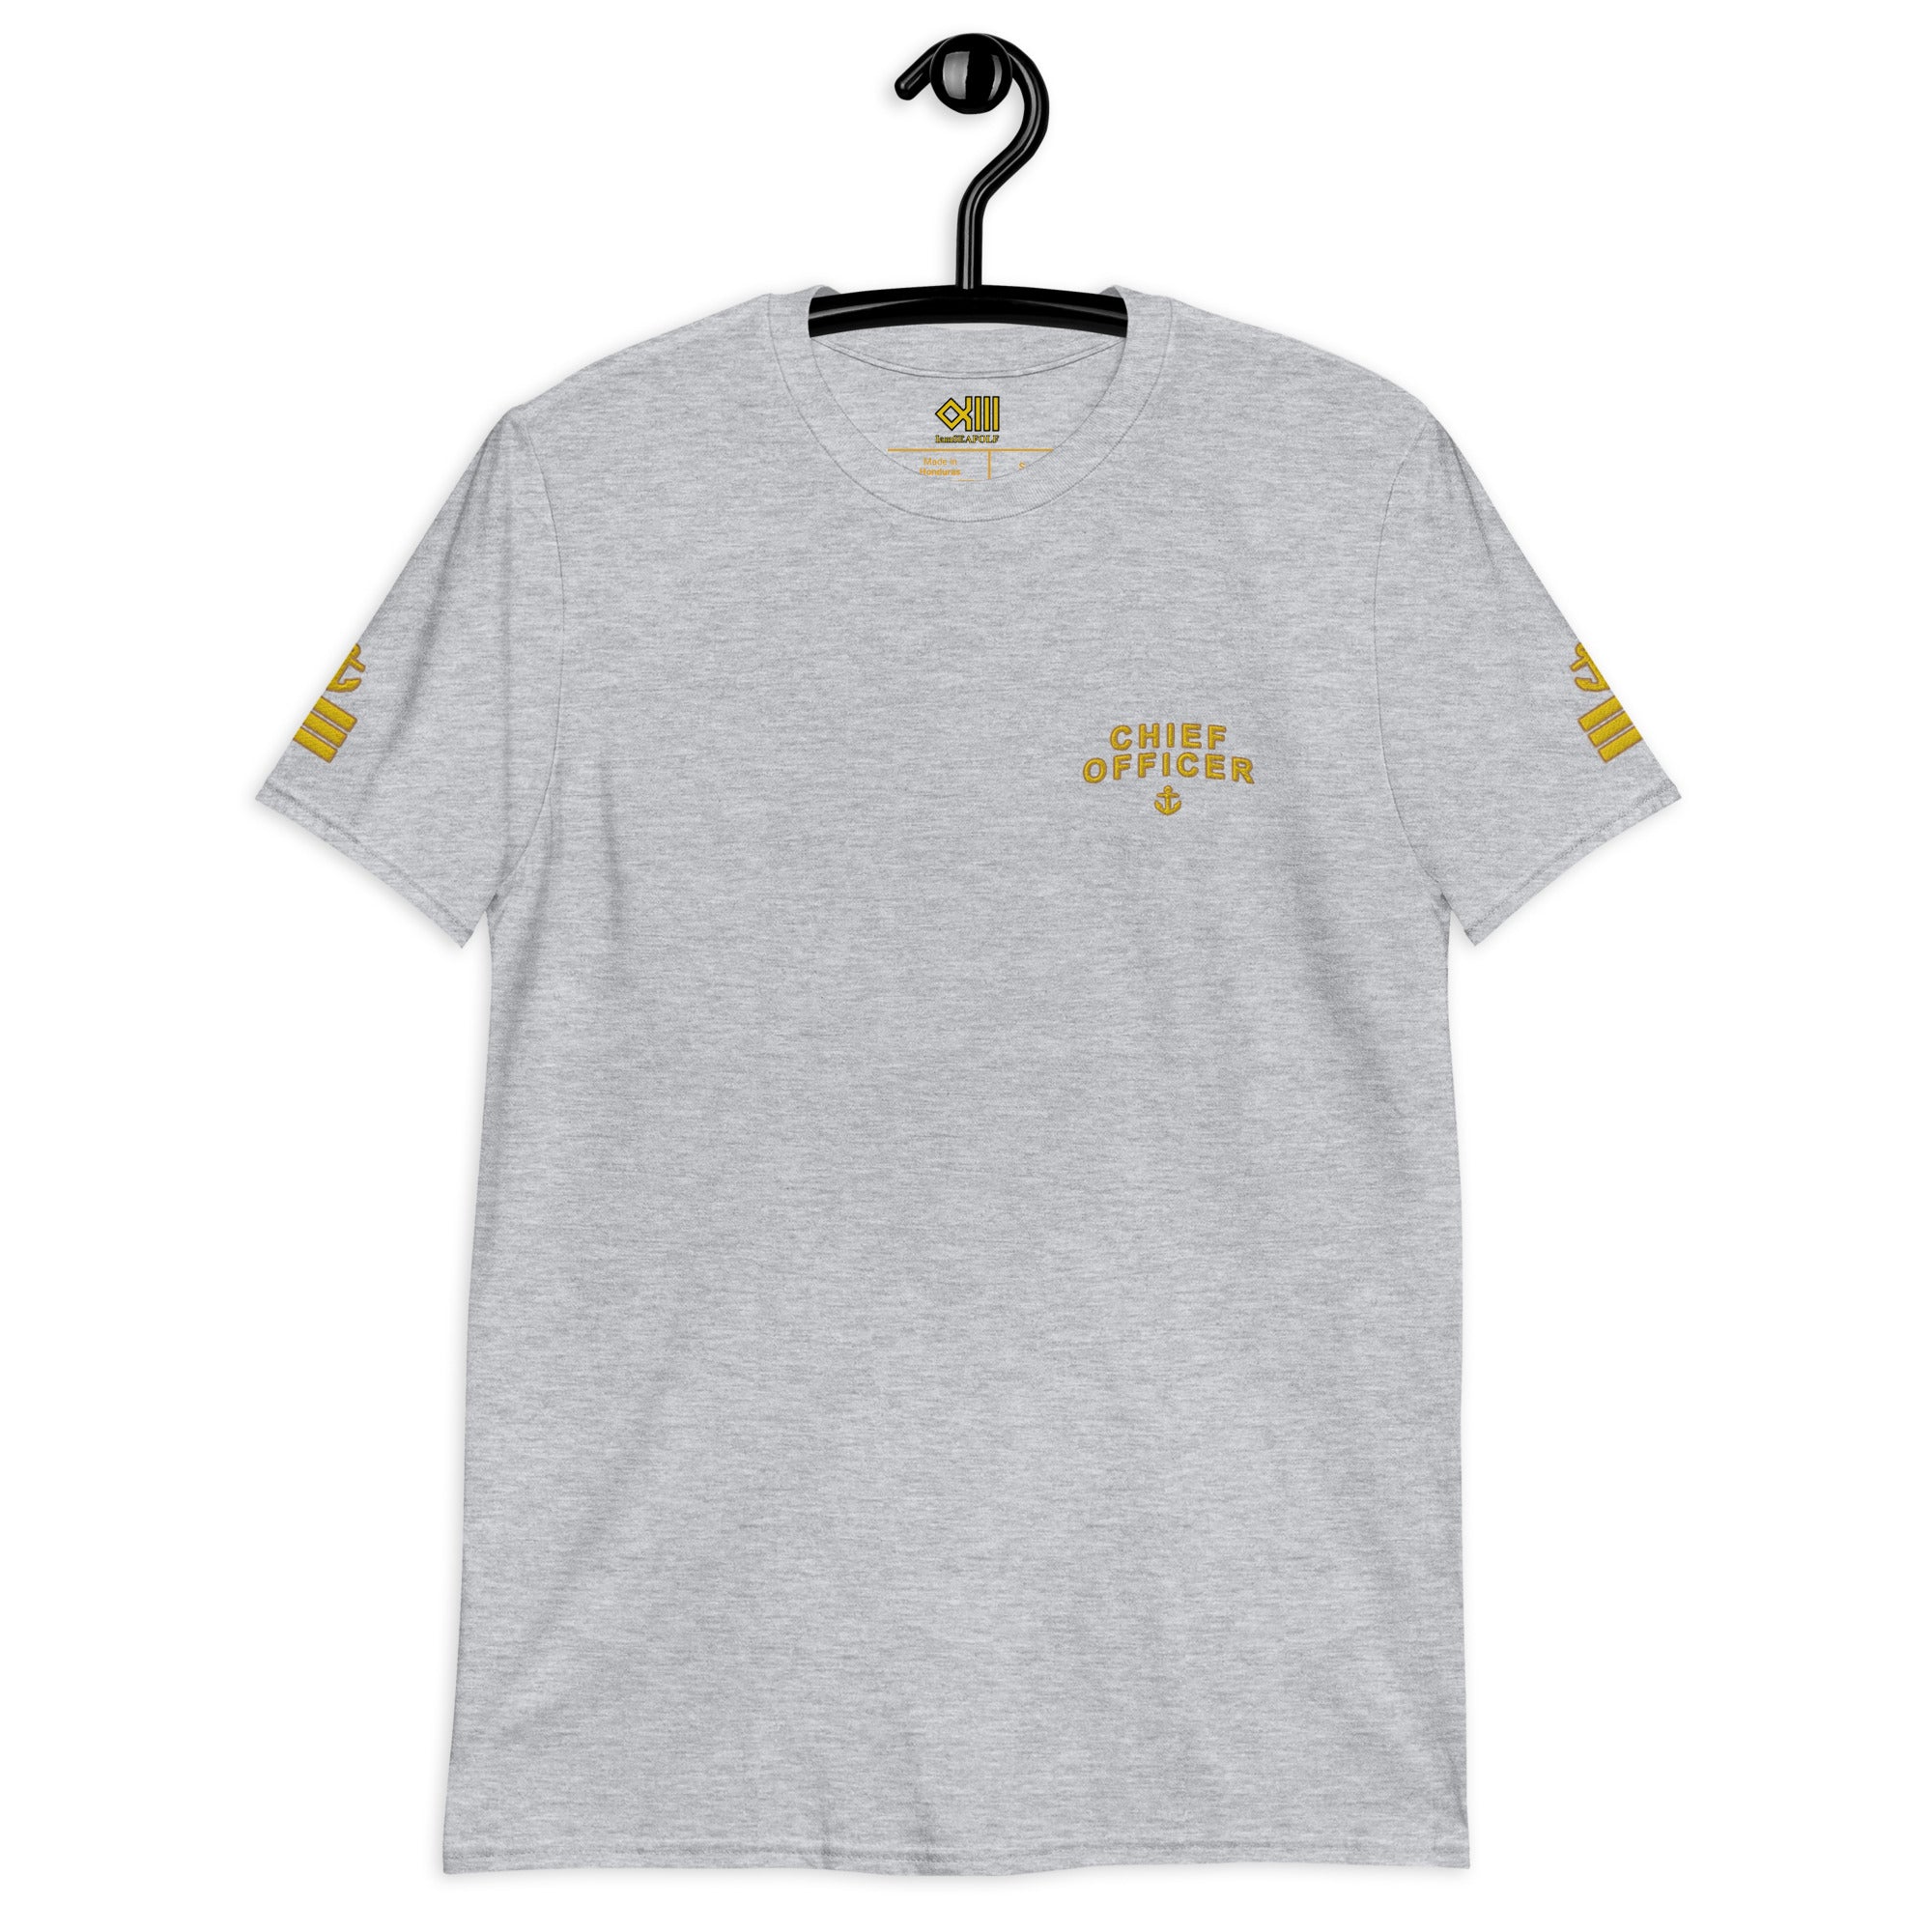 Chief Officer t-shirt with embroidery (Anchor & 3 stripes)